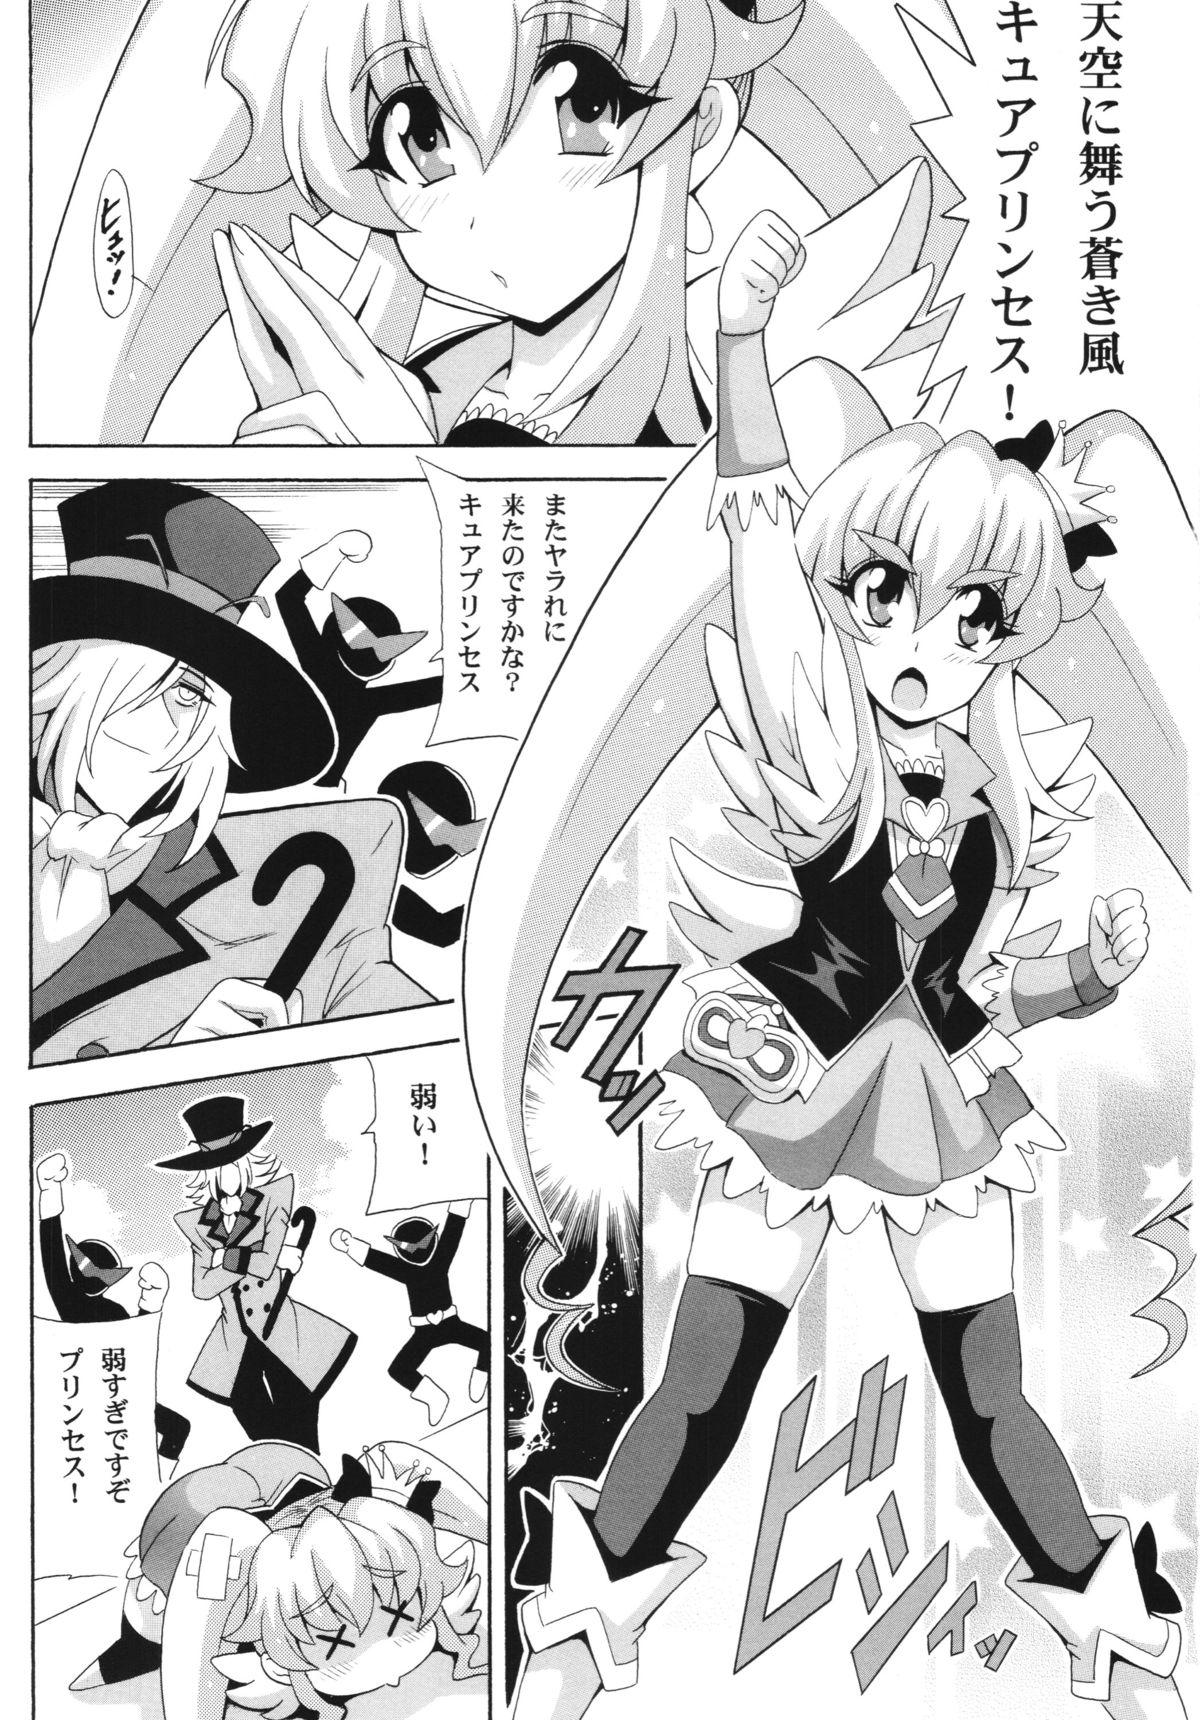 Online THE☆WEAKEST-PRINCESS - Happinesscharge precure Danish - Page 3